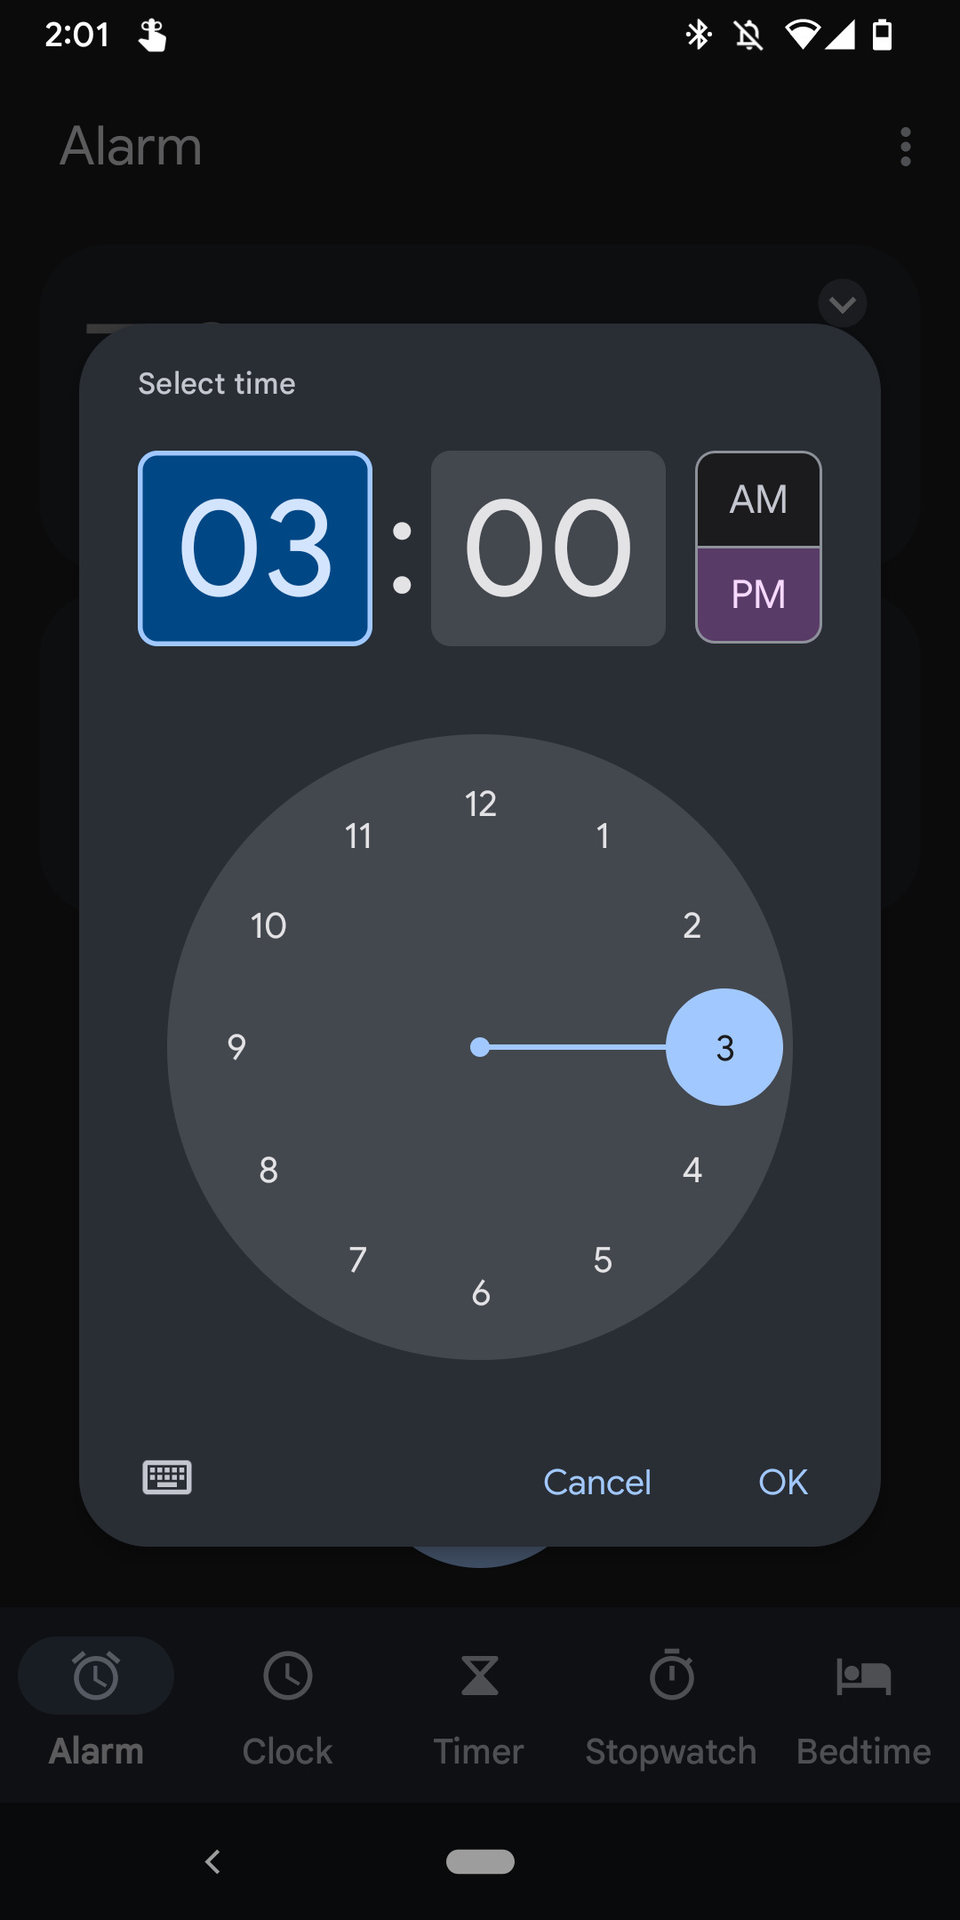 A screenshot of the Android clock app showing the process for adding a new alarm for 3:00 PM.